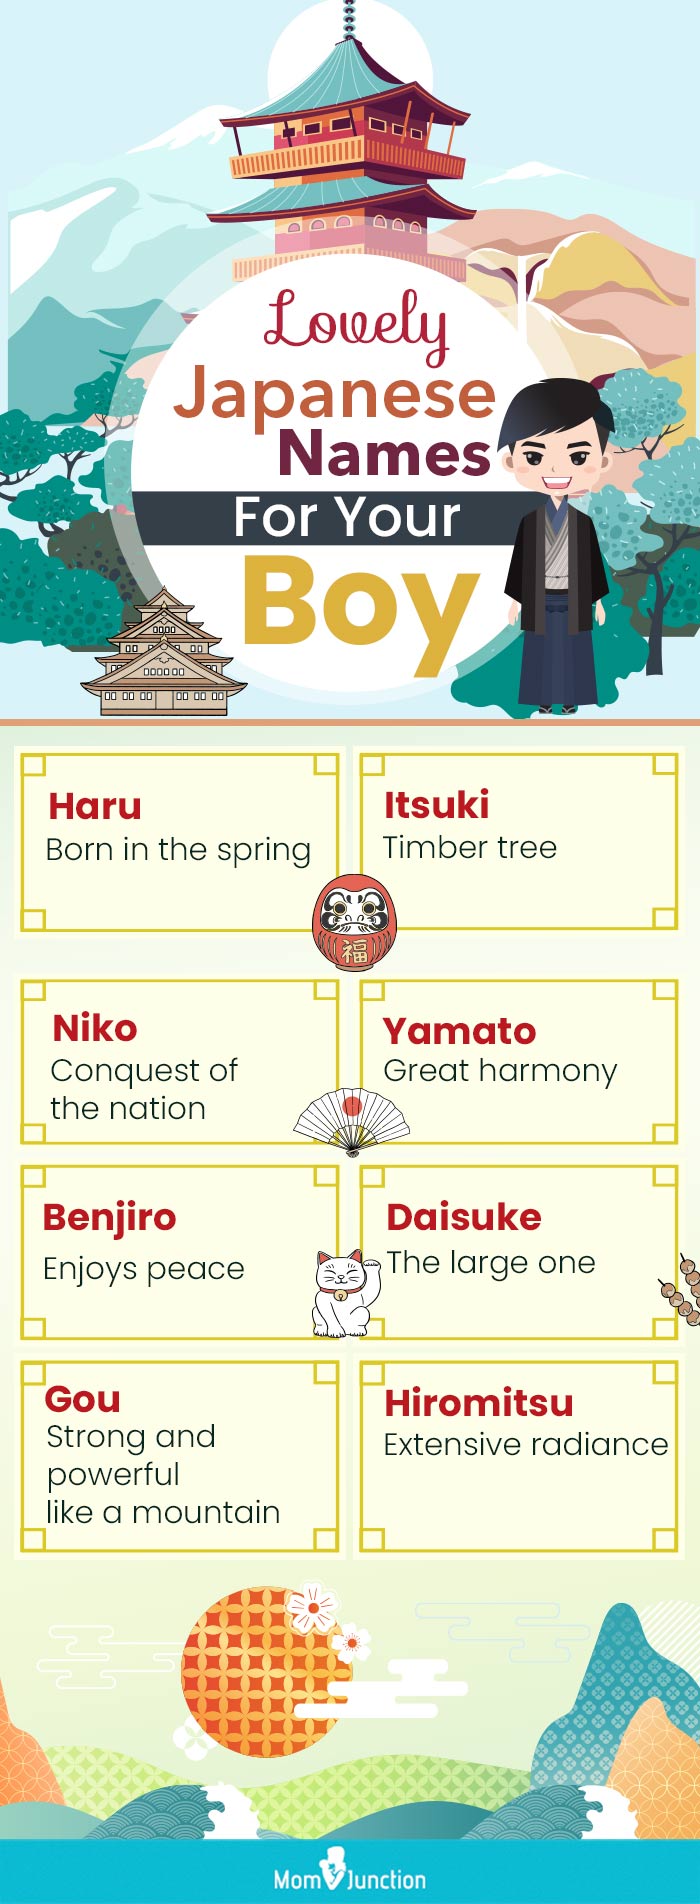 lovely japanese names for your boy (infographic)